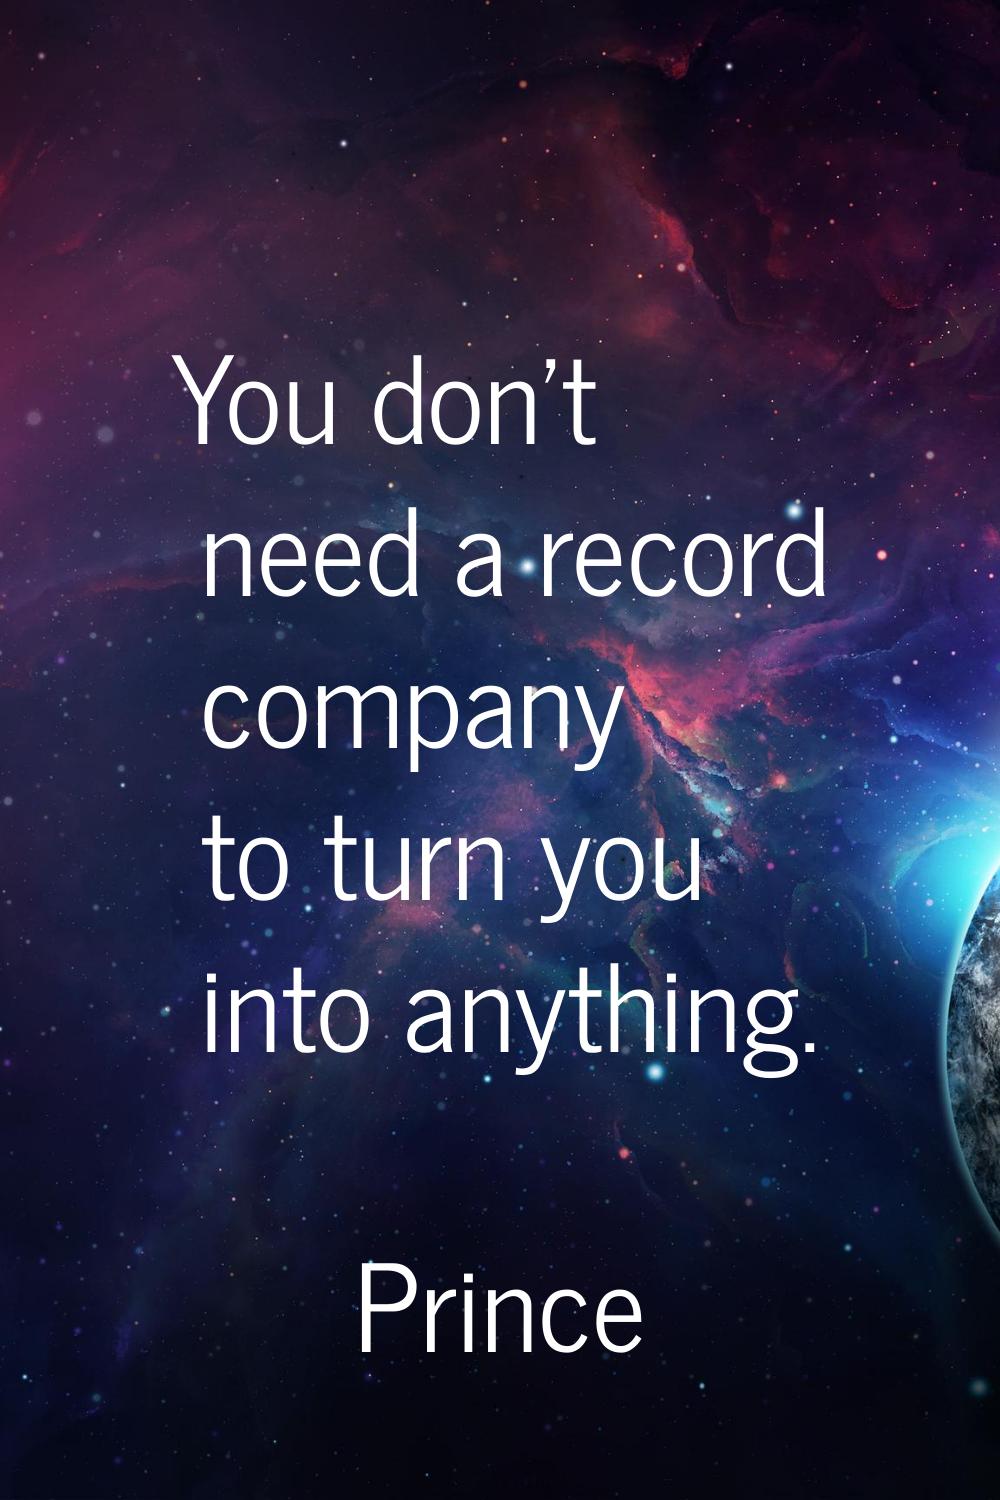 You don't need a record company to turn you into anything.